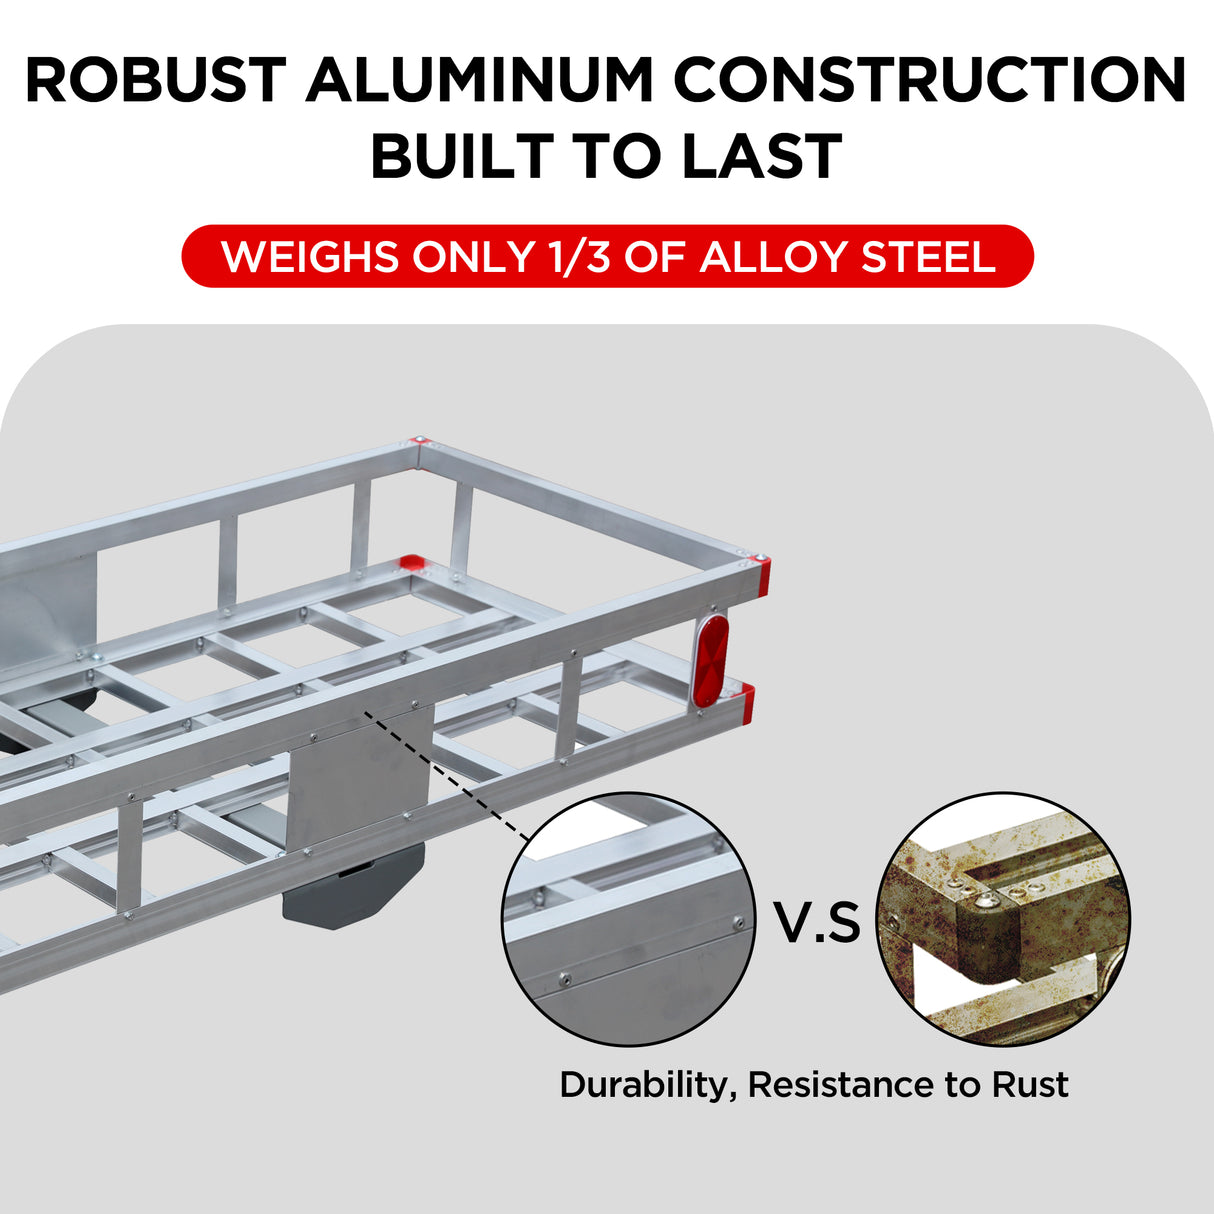 Built To Last Weighs Only 1/3 Of Alloy Steel